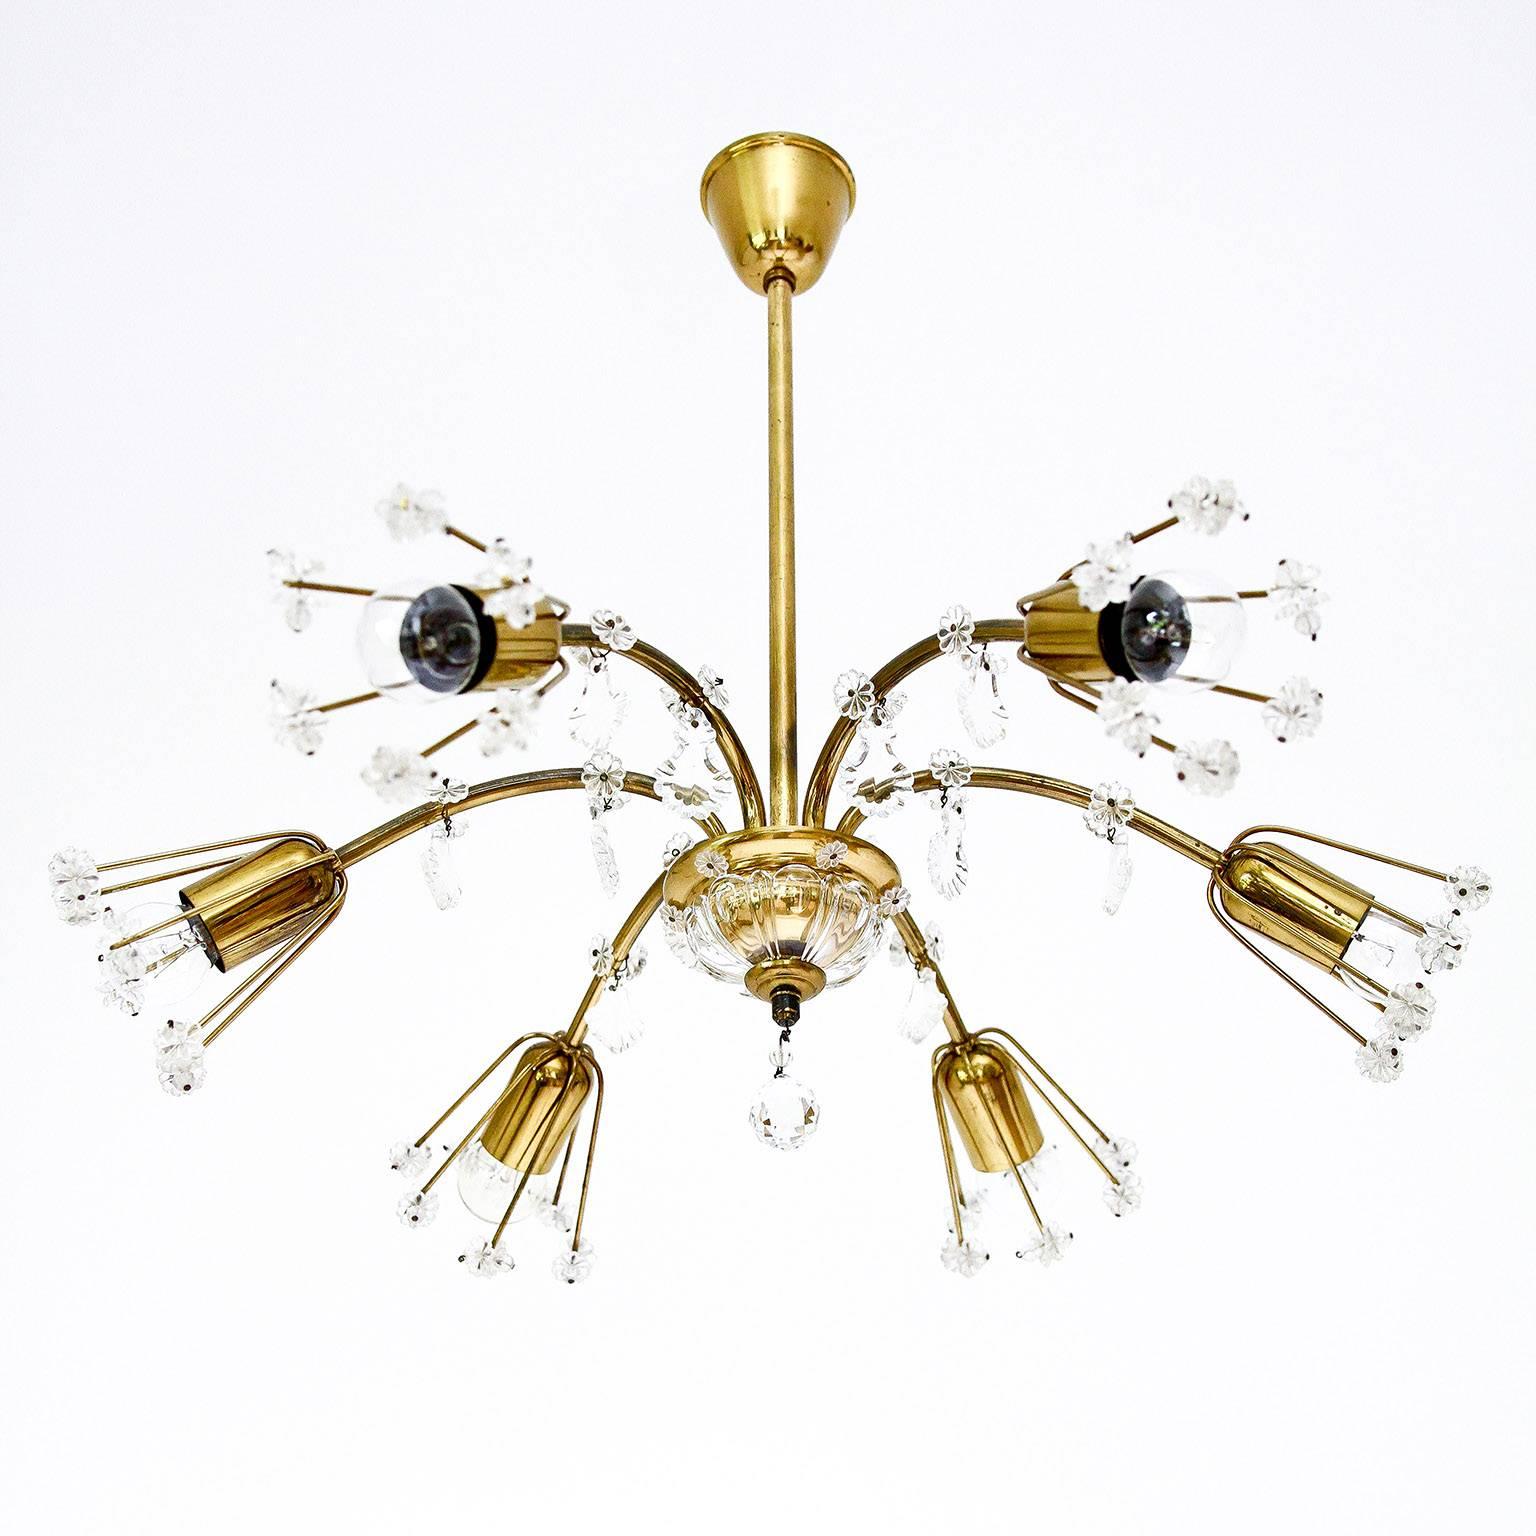 A beautiful pair of floral chandeliers or flush mount light fixtures designed by Emil Stejnar for Rupert Nikoll, Vienna Austria, from the 1950s. We can shorten the stems and add a flush mounting plate if required.

They are made of brass with many